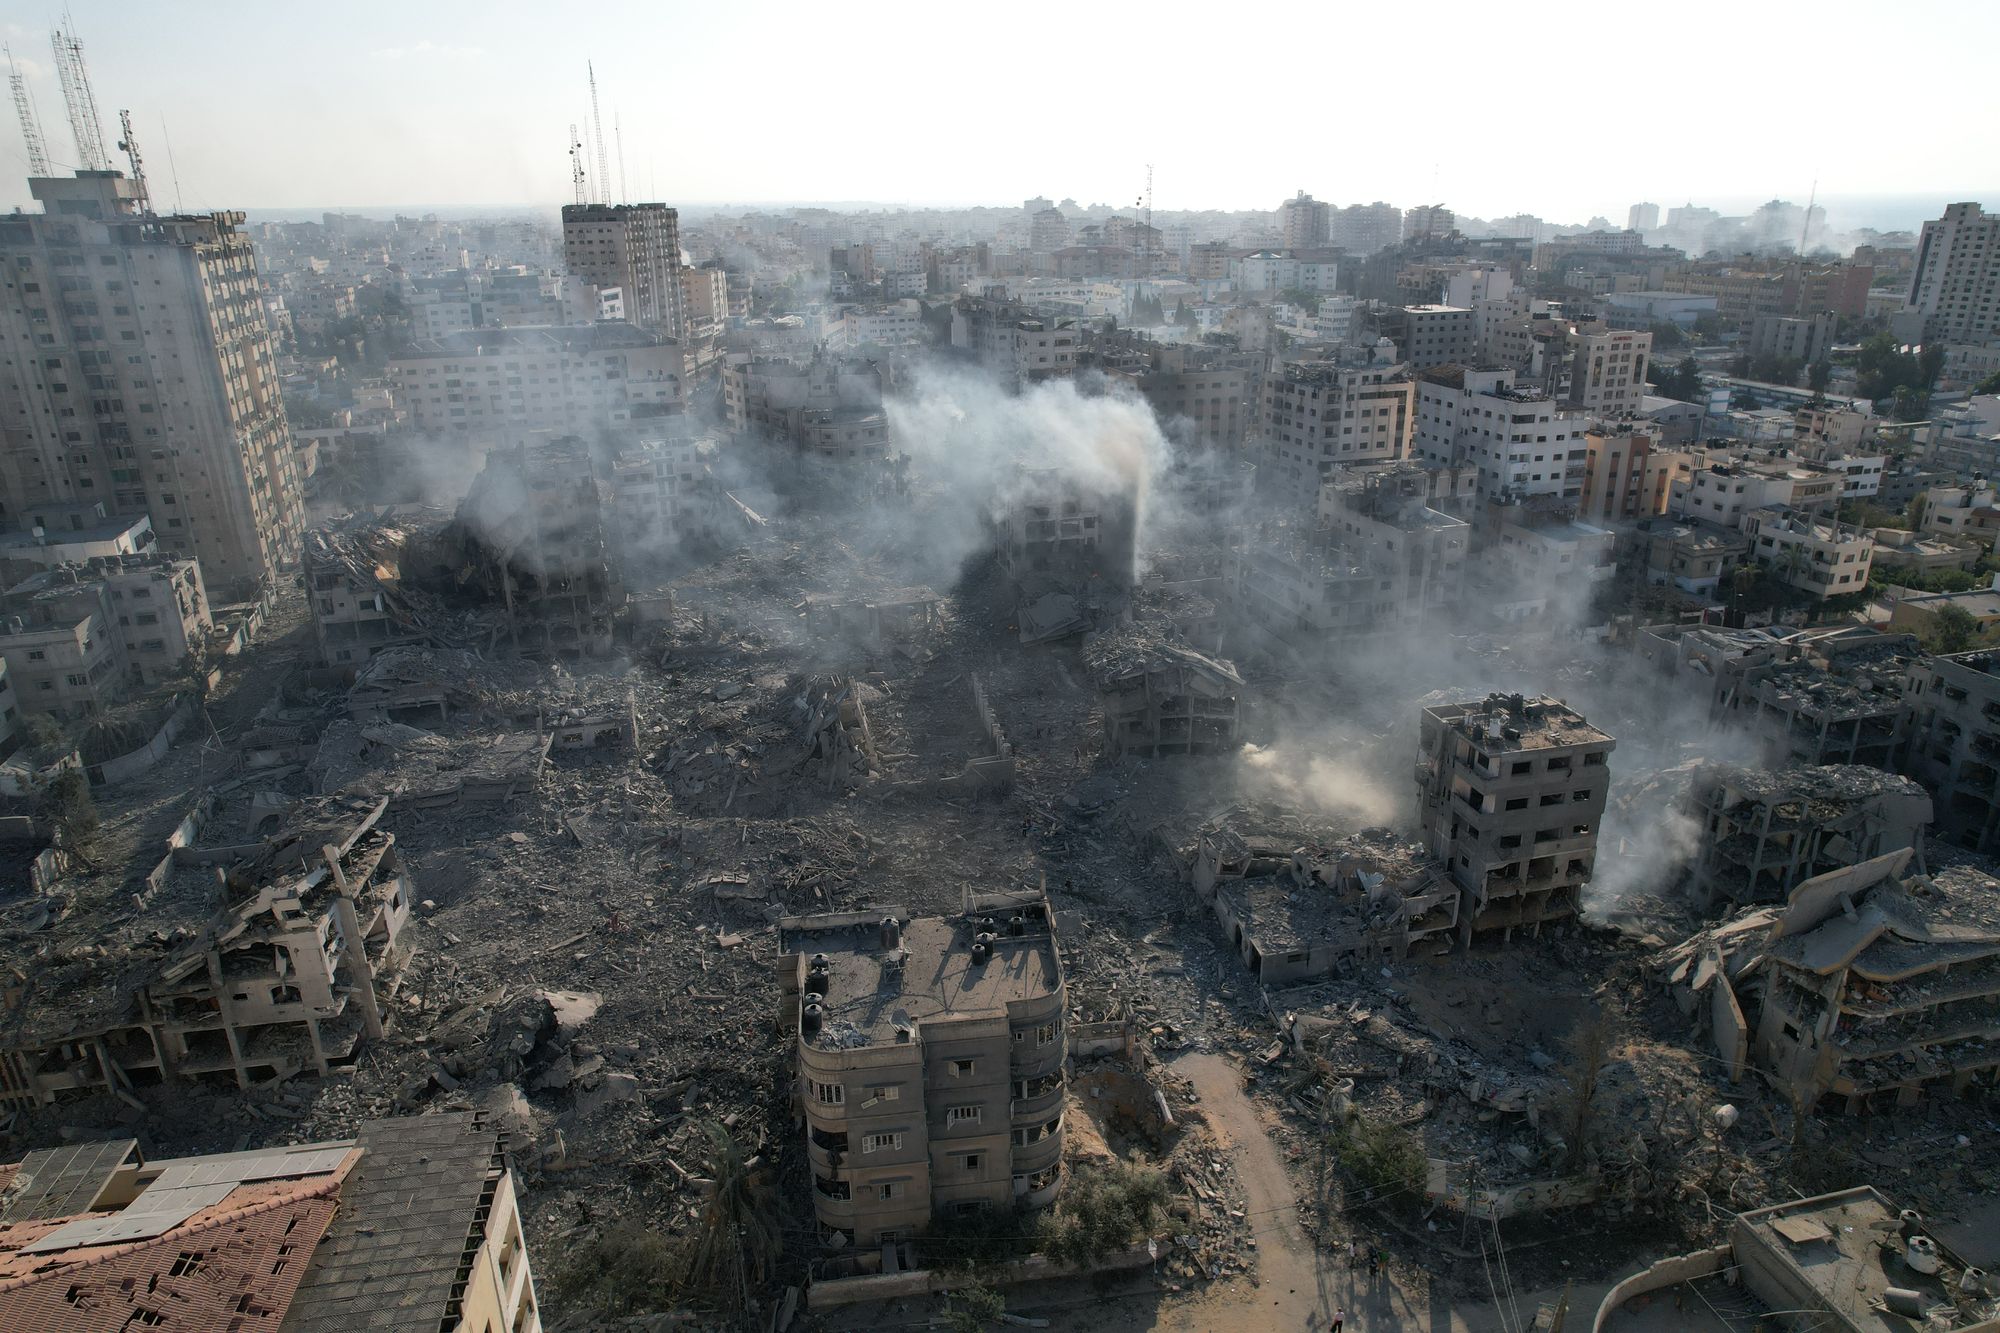 How to Document Atrocities in the Gaza War